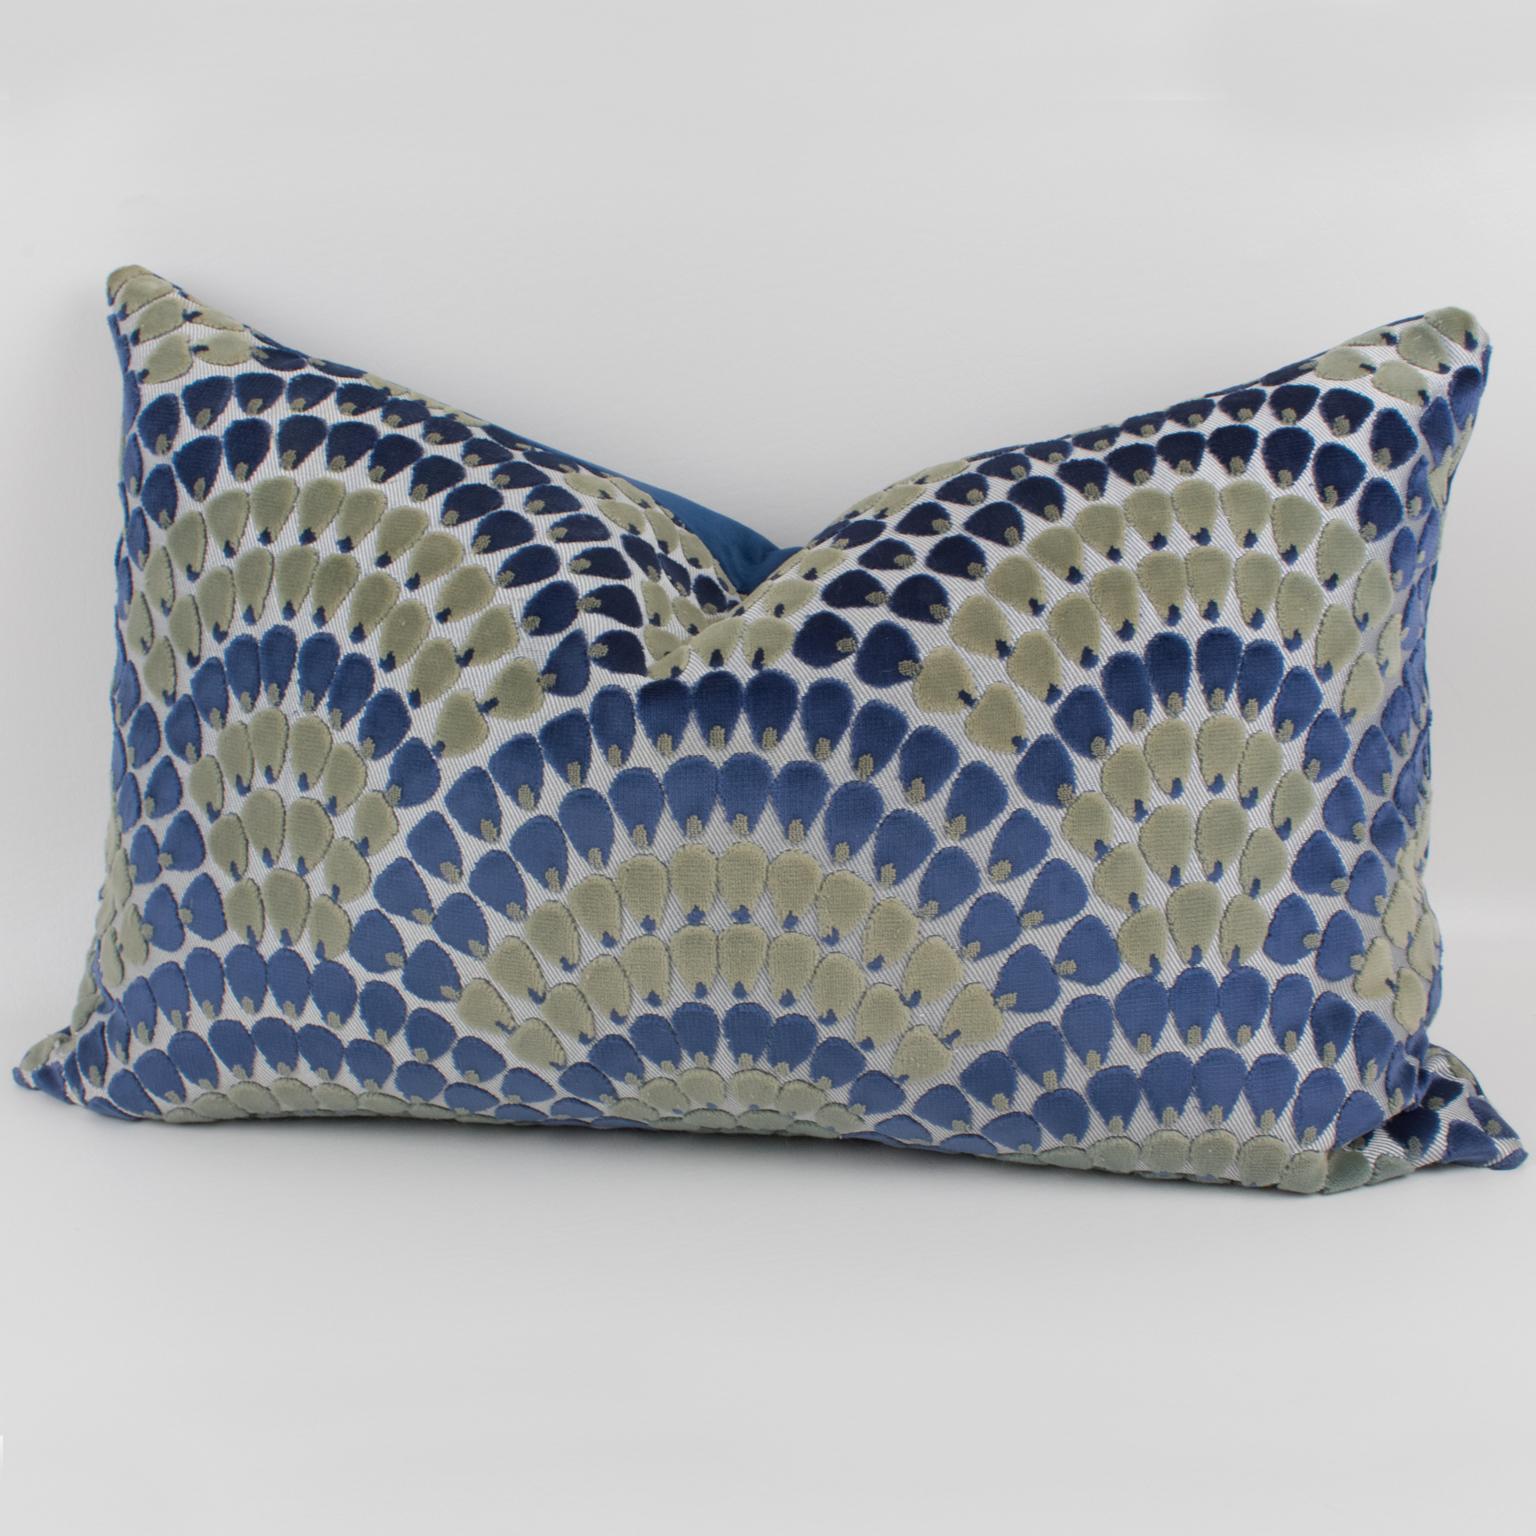 Lovely Art Deco-inspired throw pillow. This lumbar pillow is covered on the front with a textured arabesque geometric design in royal blue and almond green velvet. The back is of royal blue velvet. A zipper encloses an inner feather pillow. An